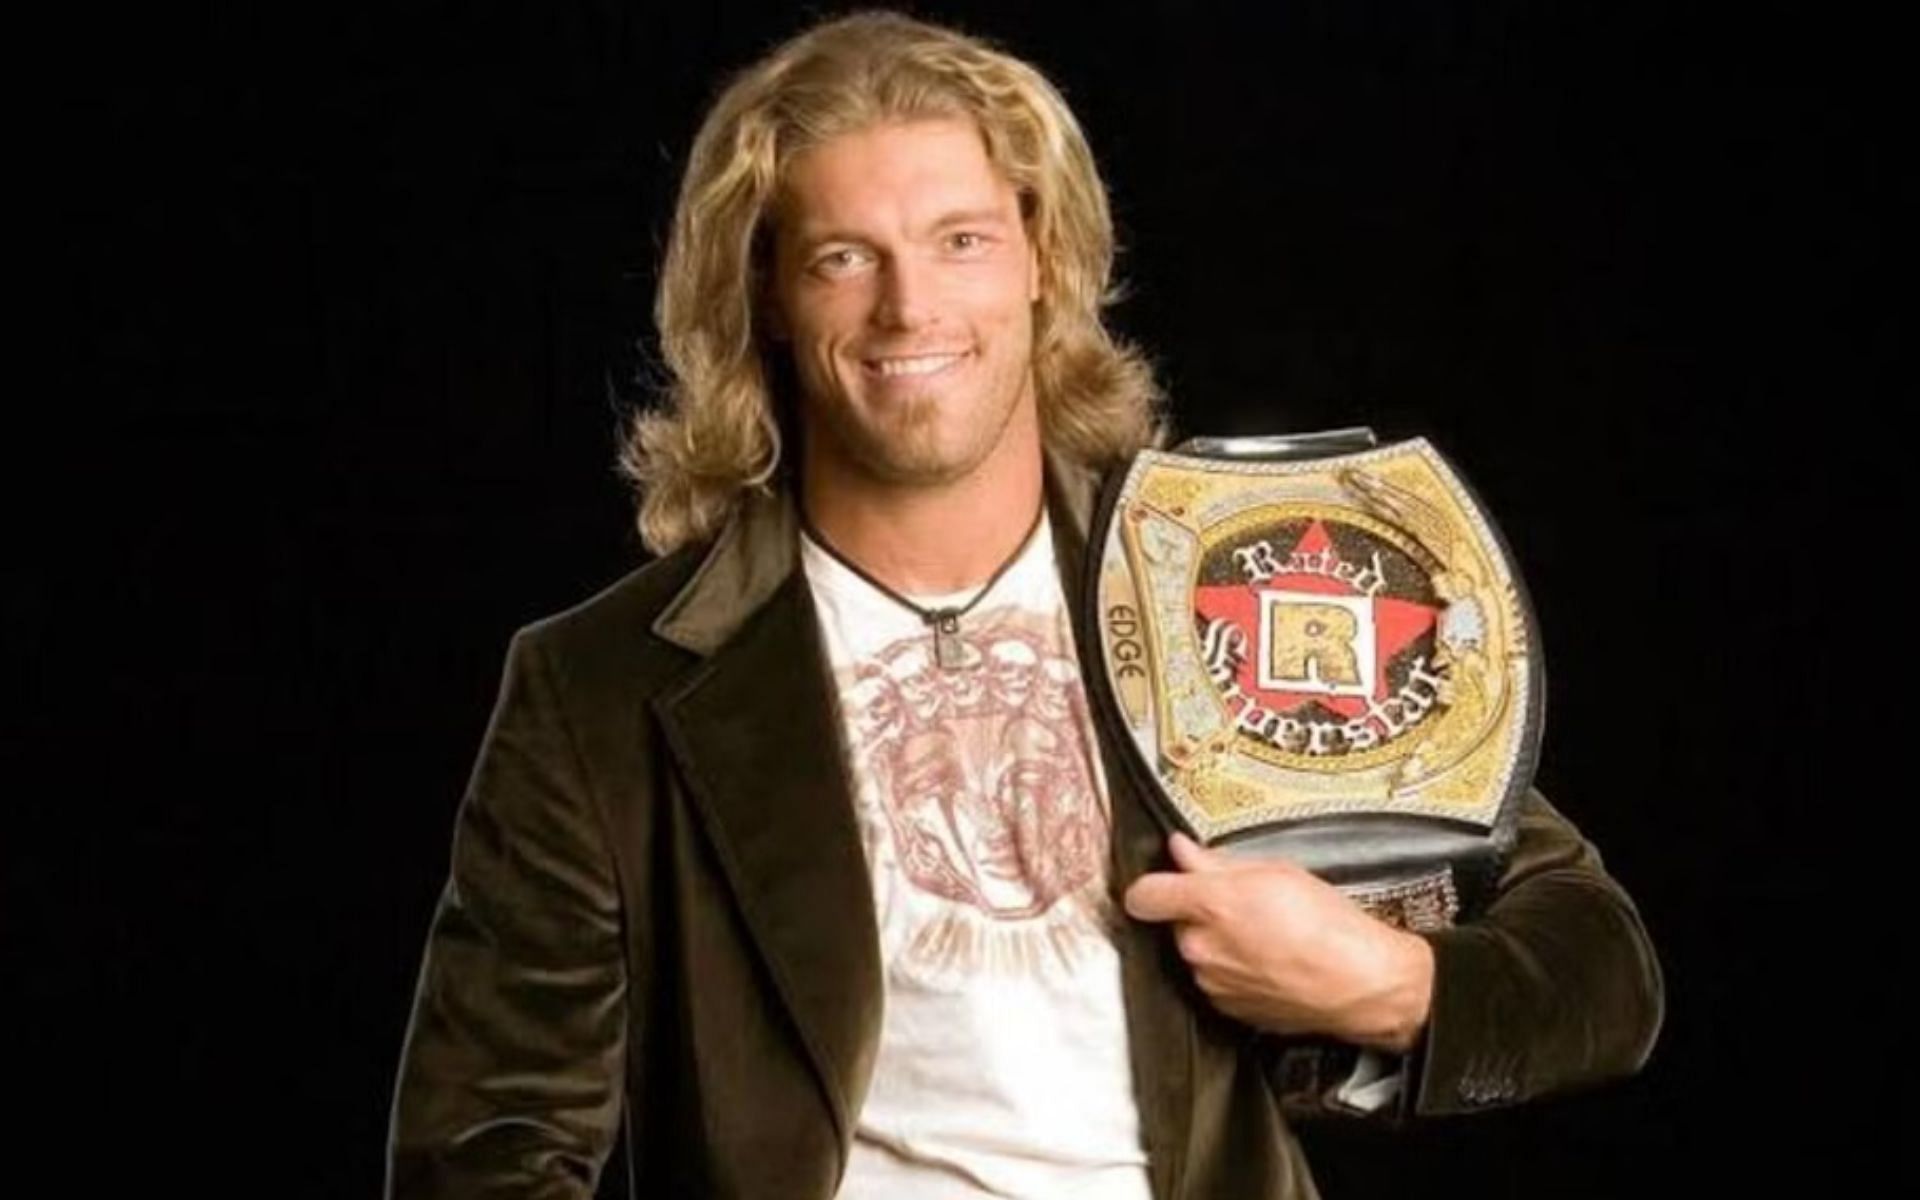 Edge with his customized version of the spinner belt